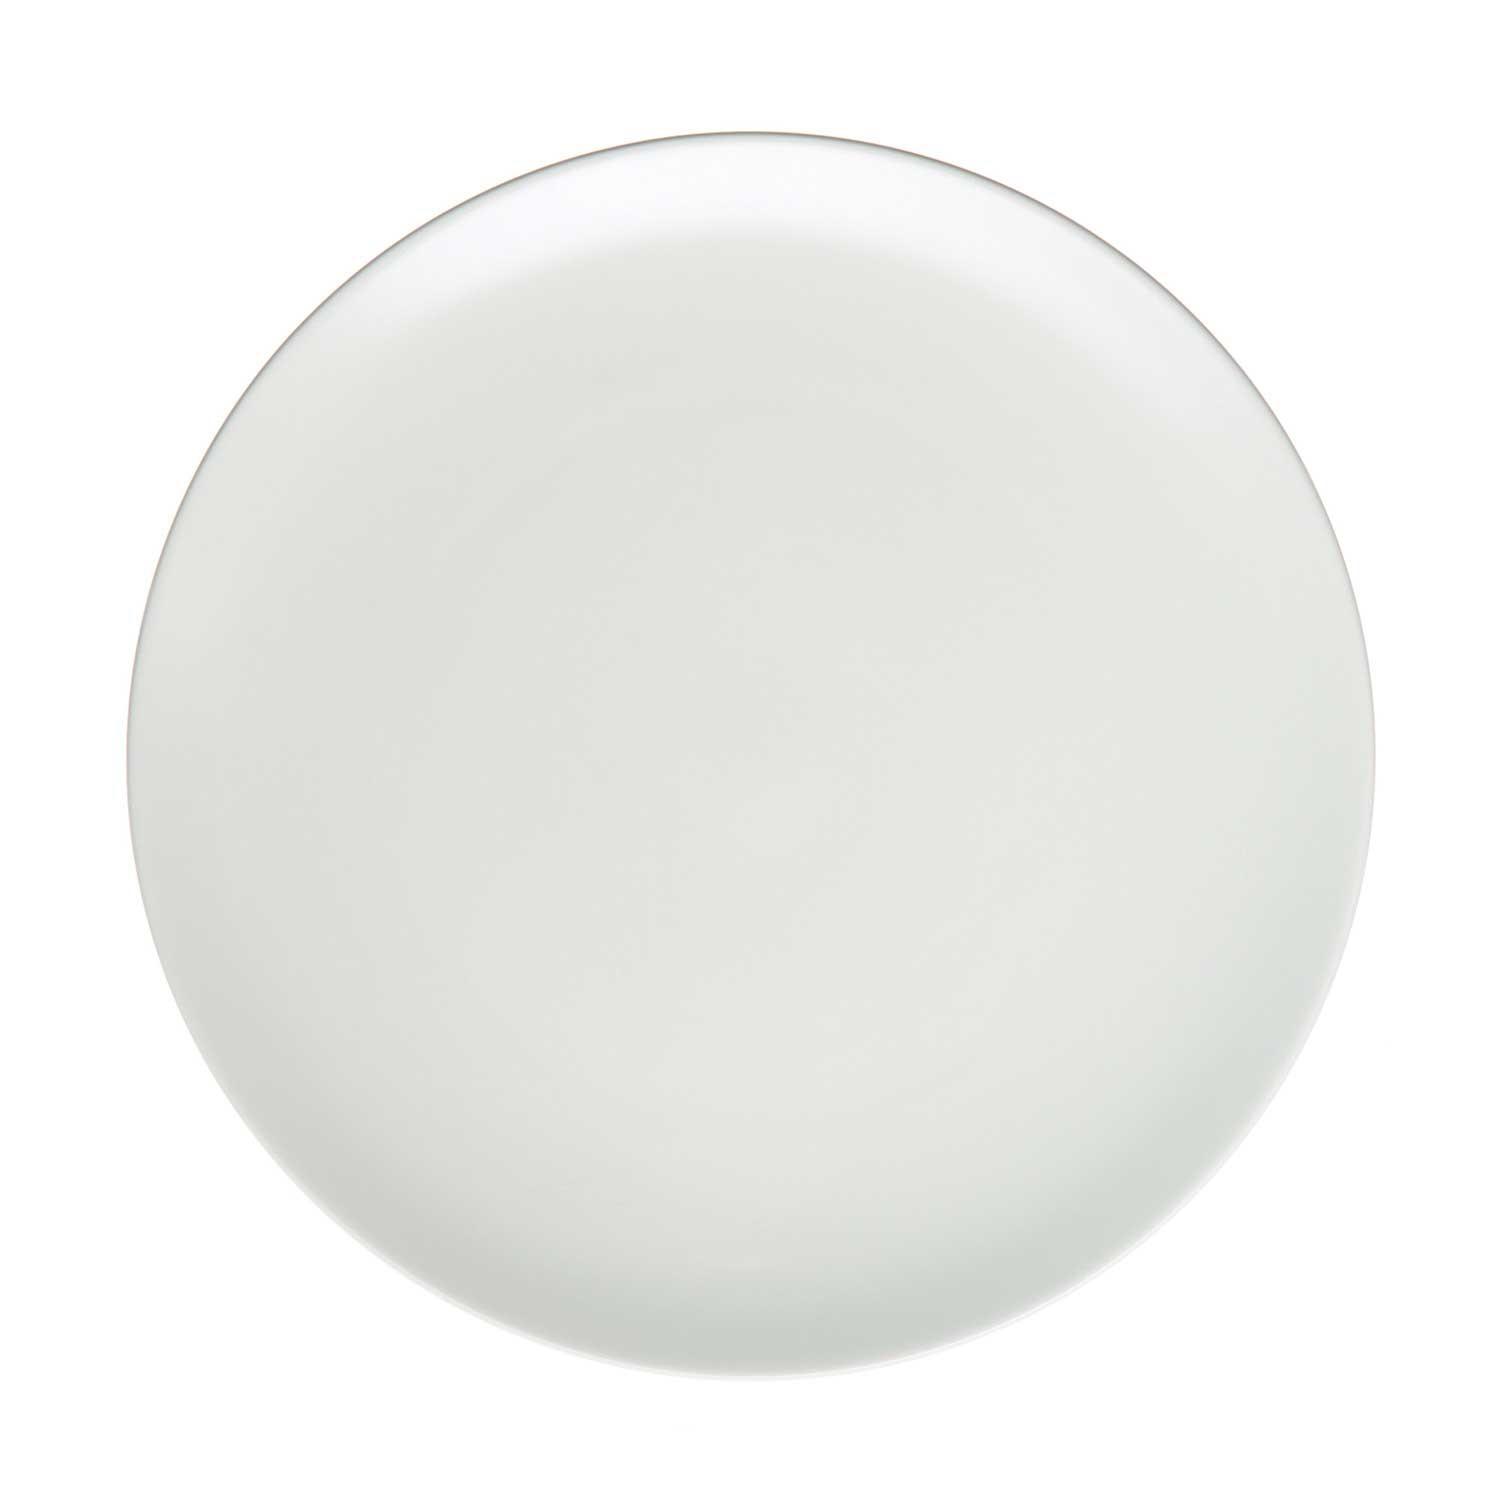 Jenggala Everyday Dinner Plate